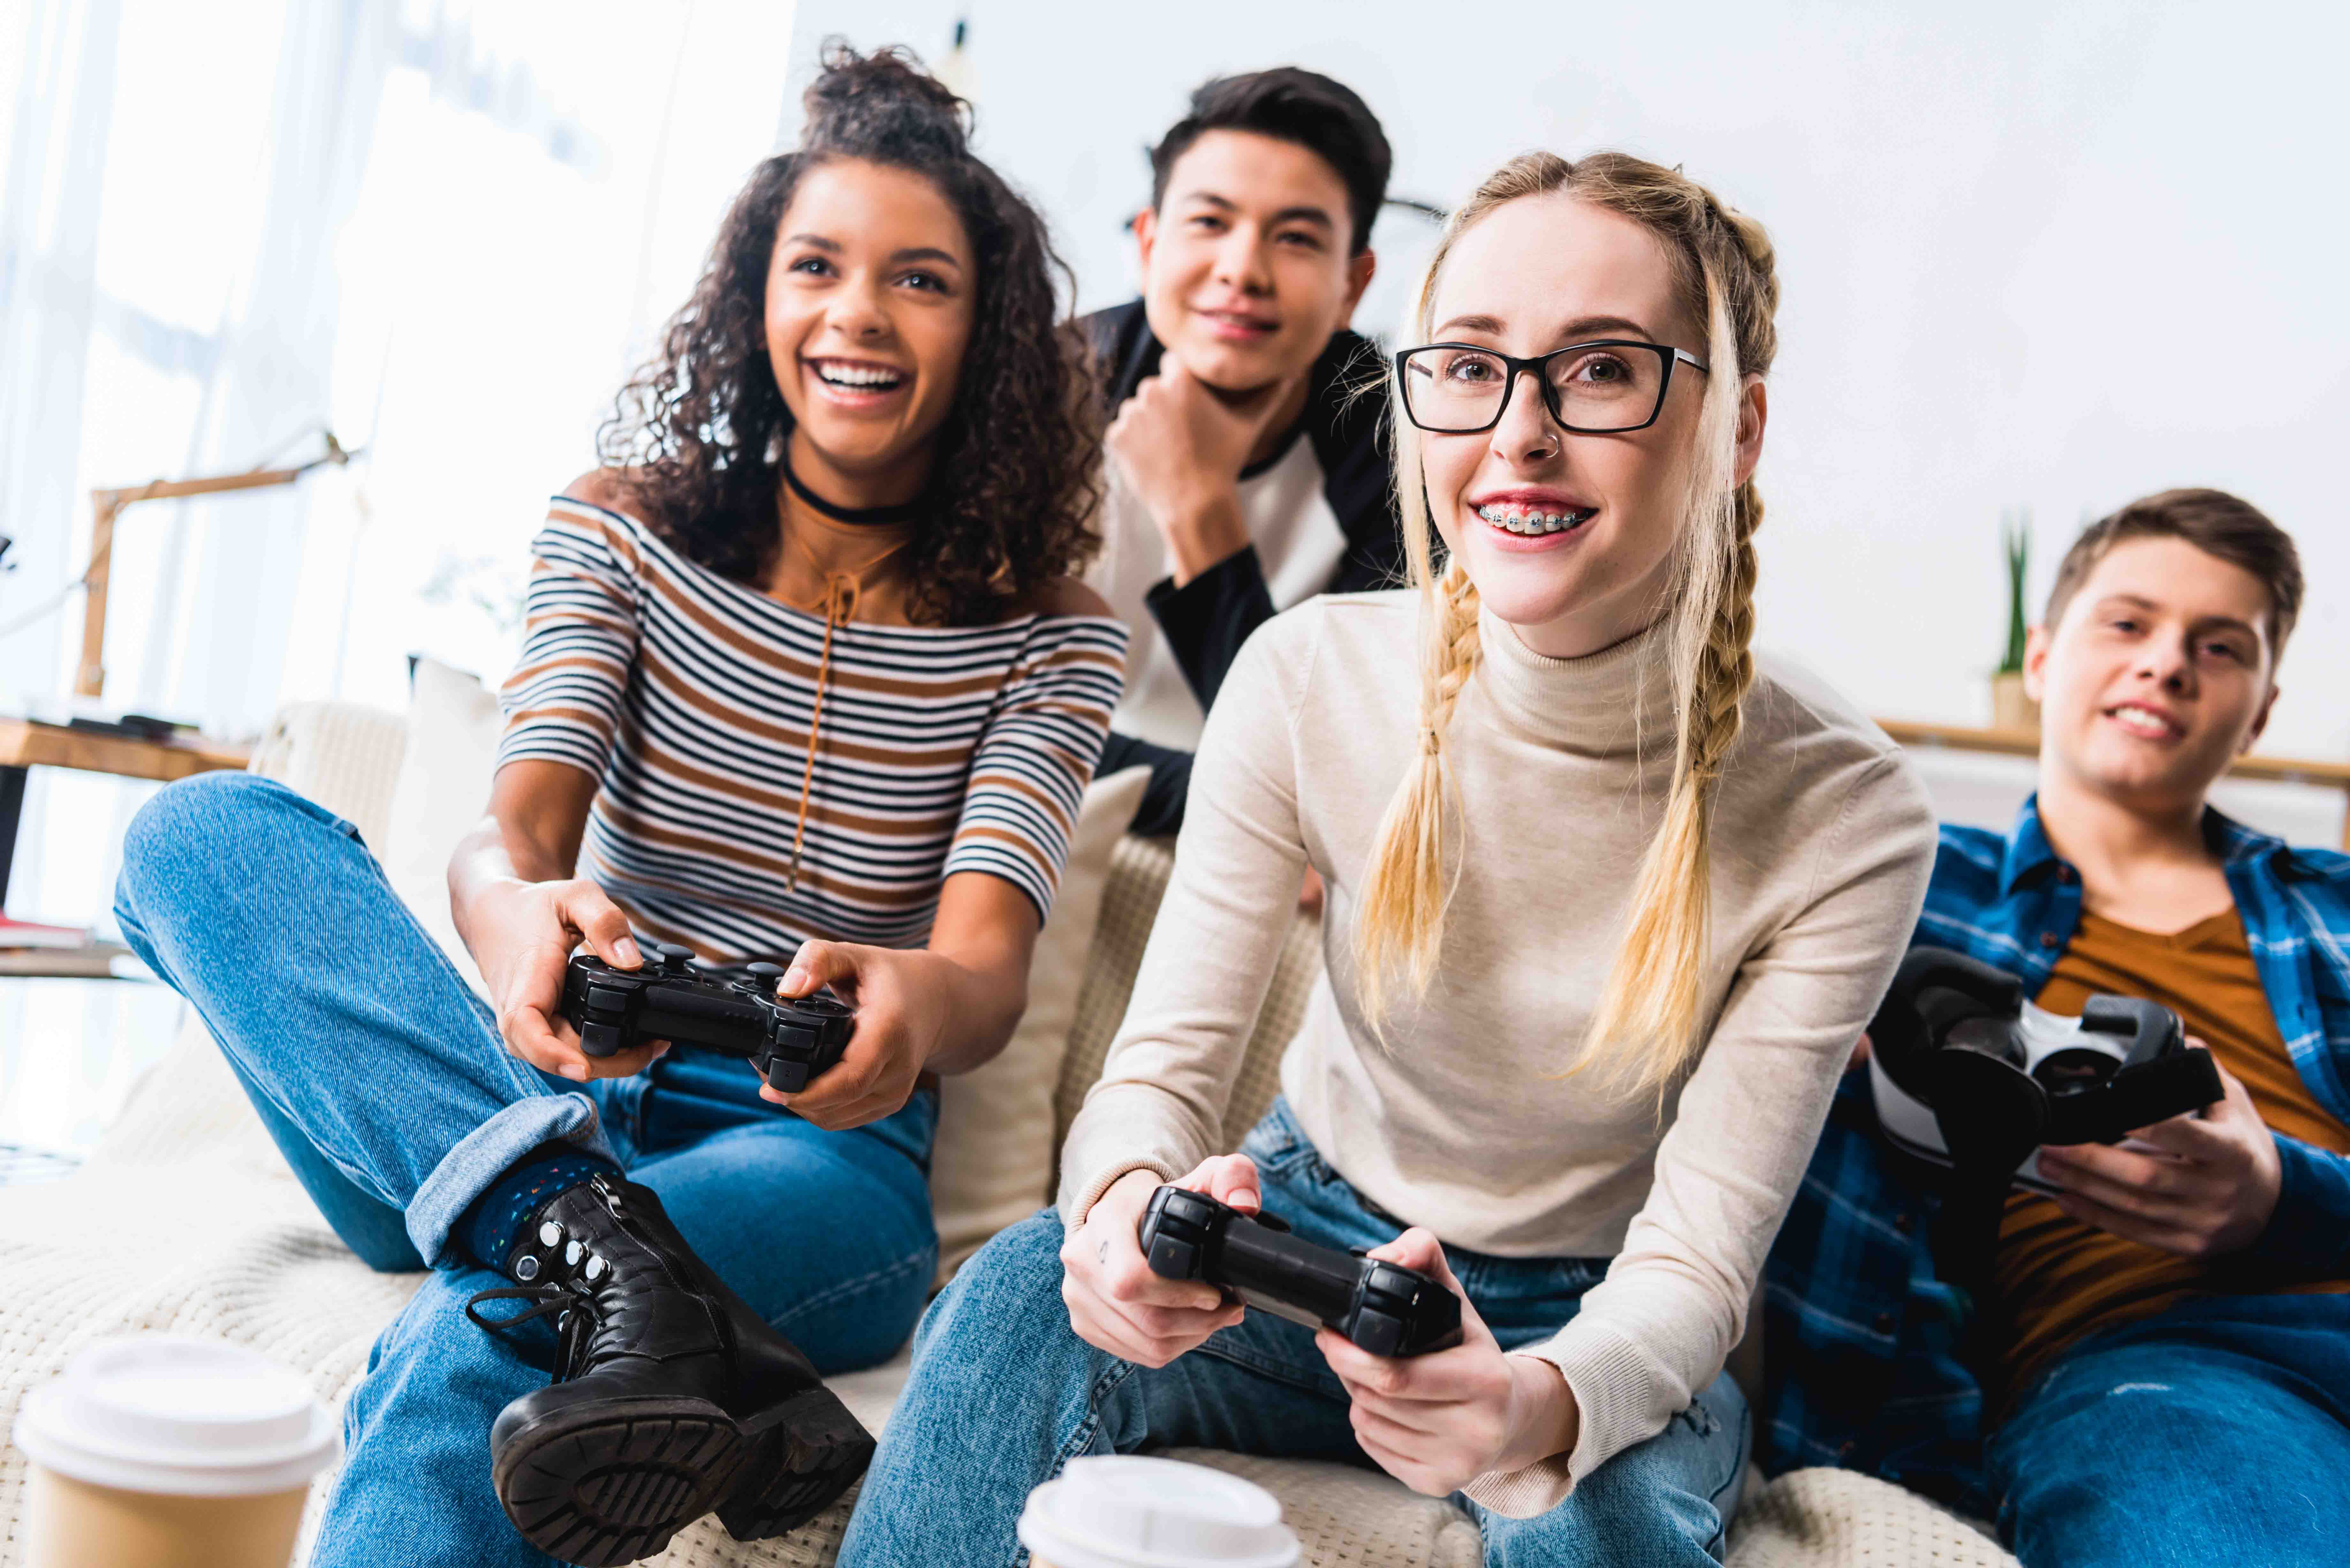 Mind Games: How Video Games Can Play a Positive Role in Mental Health. -  Microsoft Apps